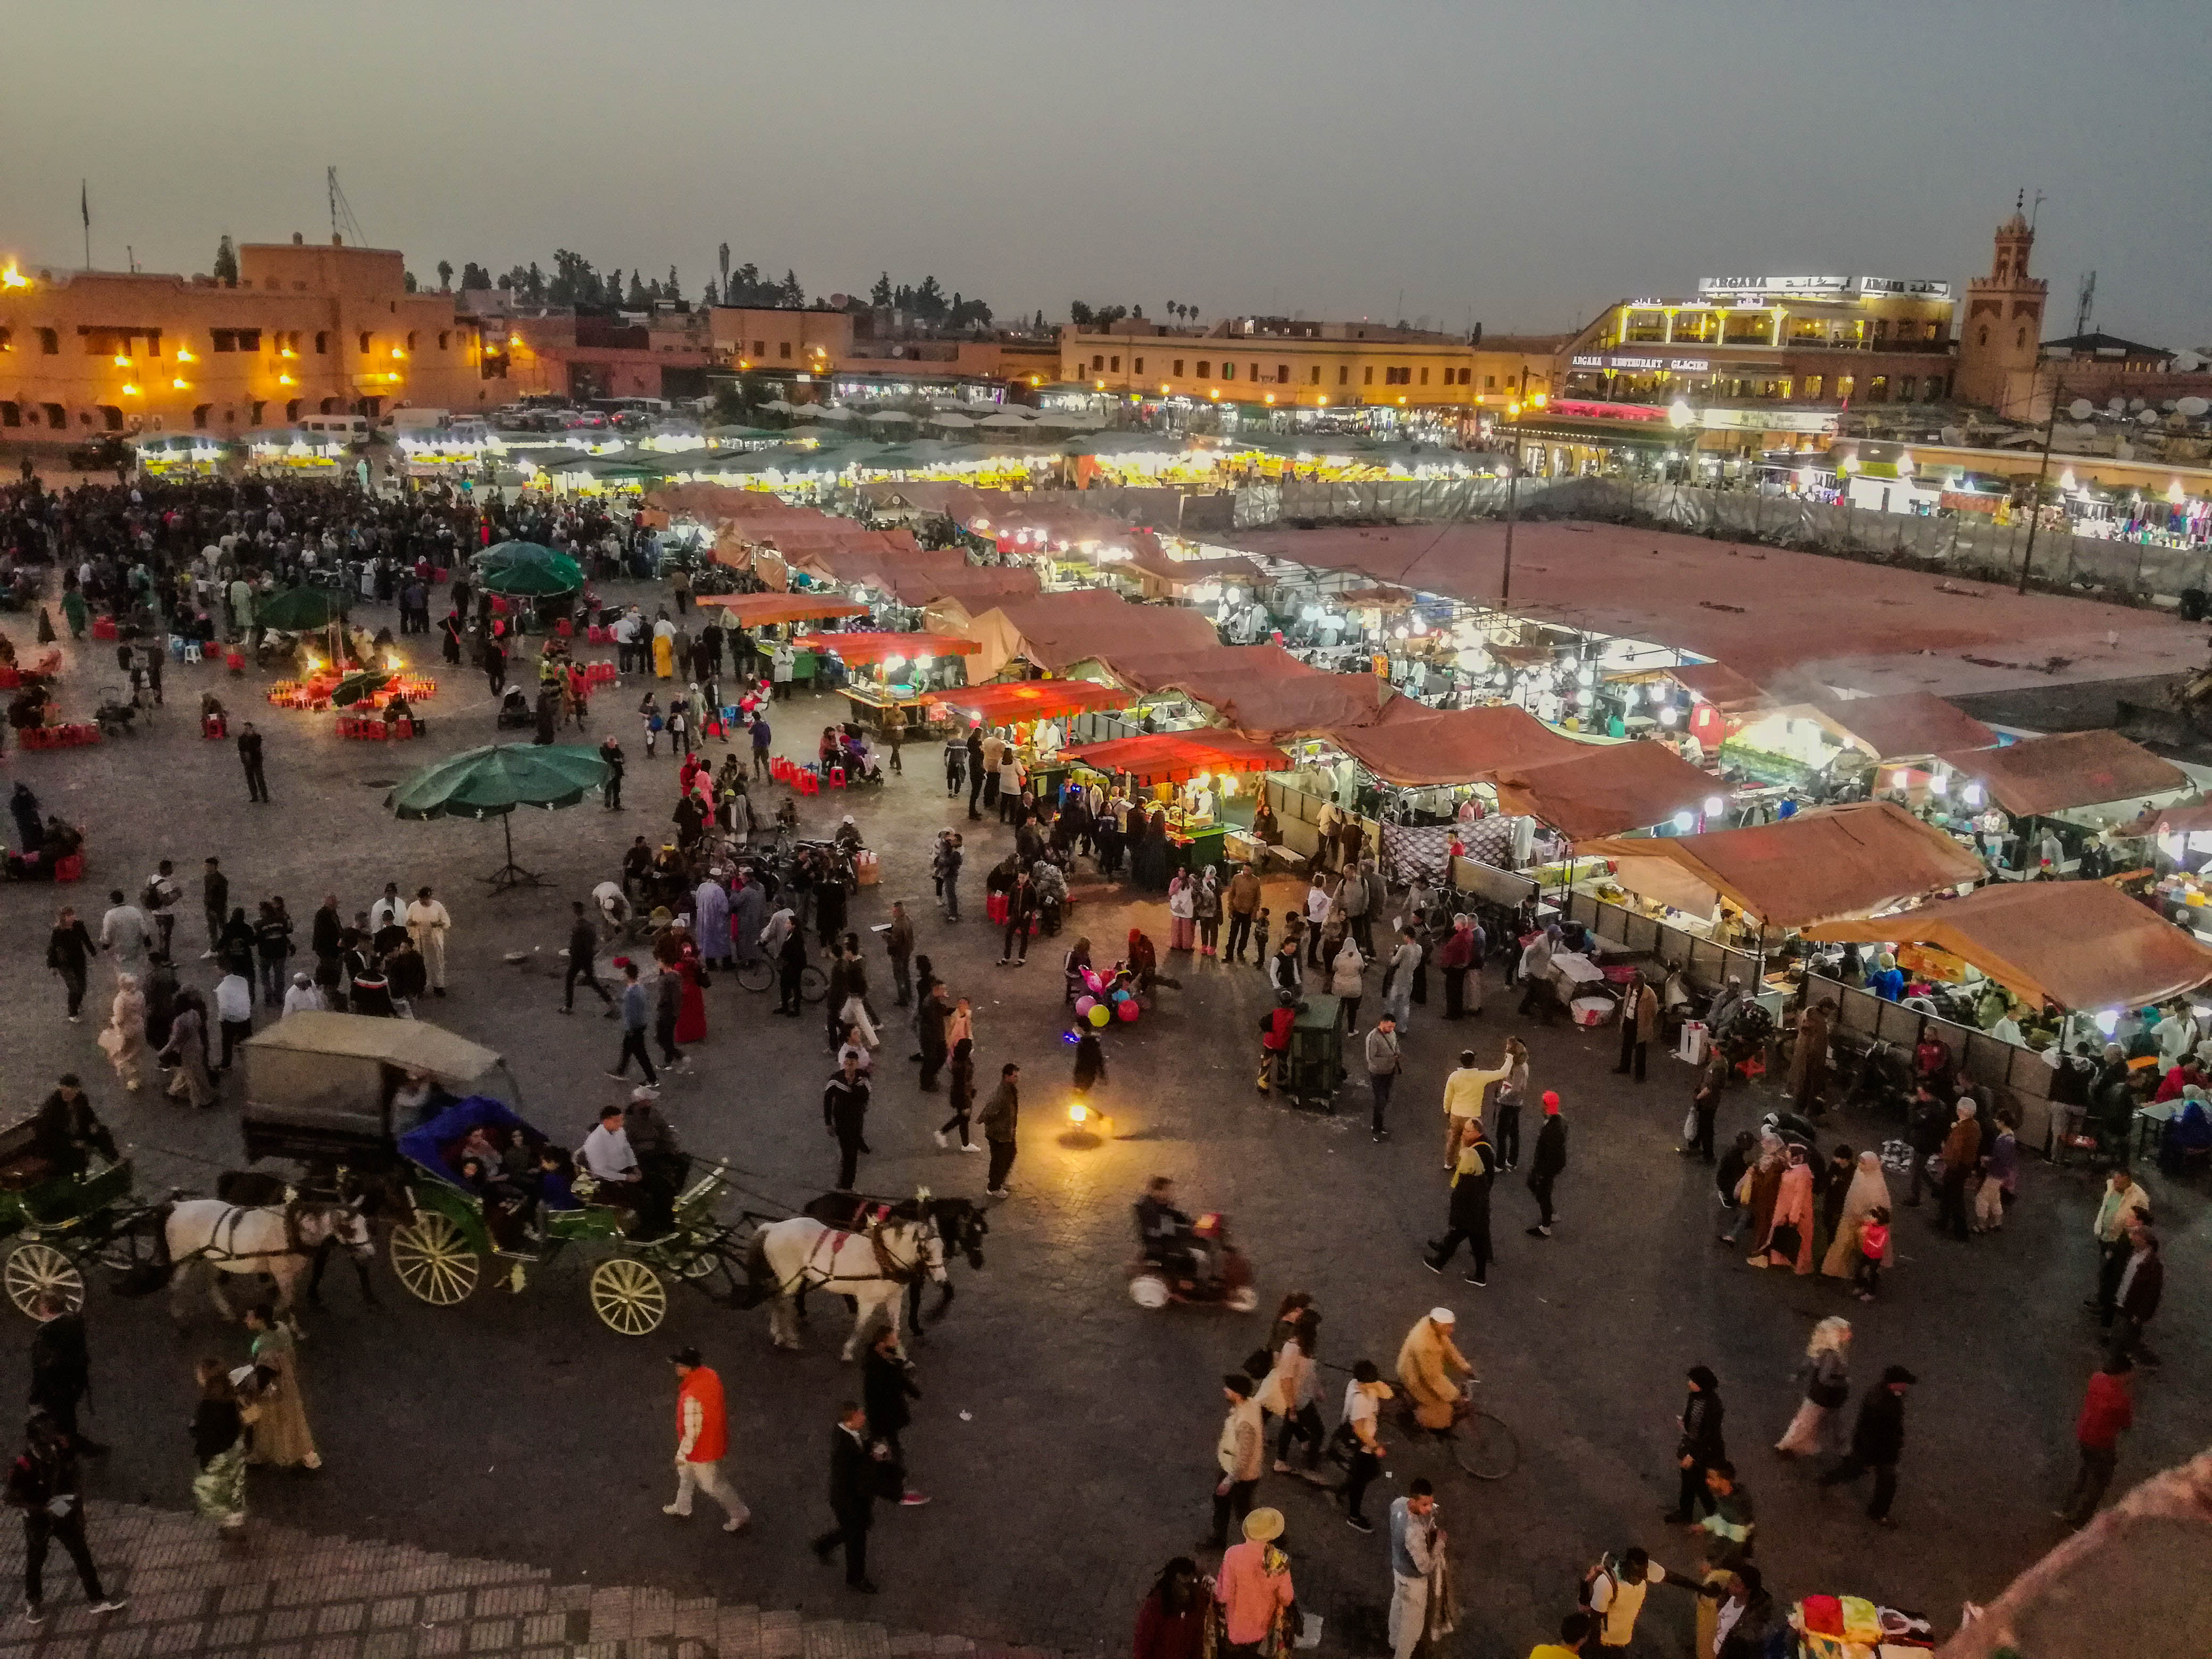 Marrakech Travel Tips: What to Do, What to Eat, What to Avoid